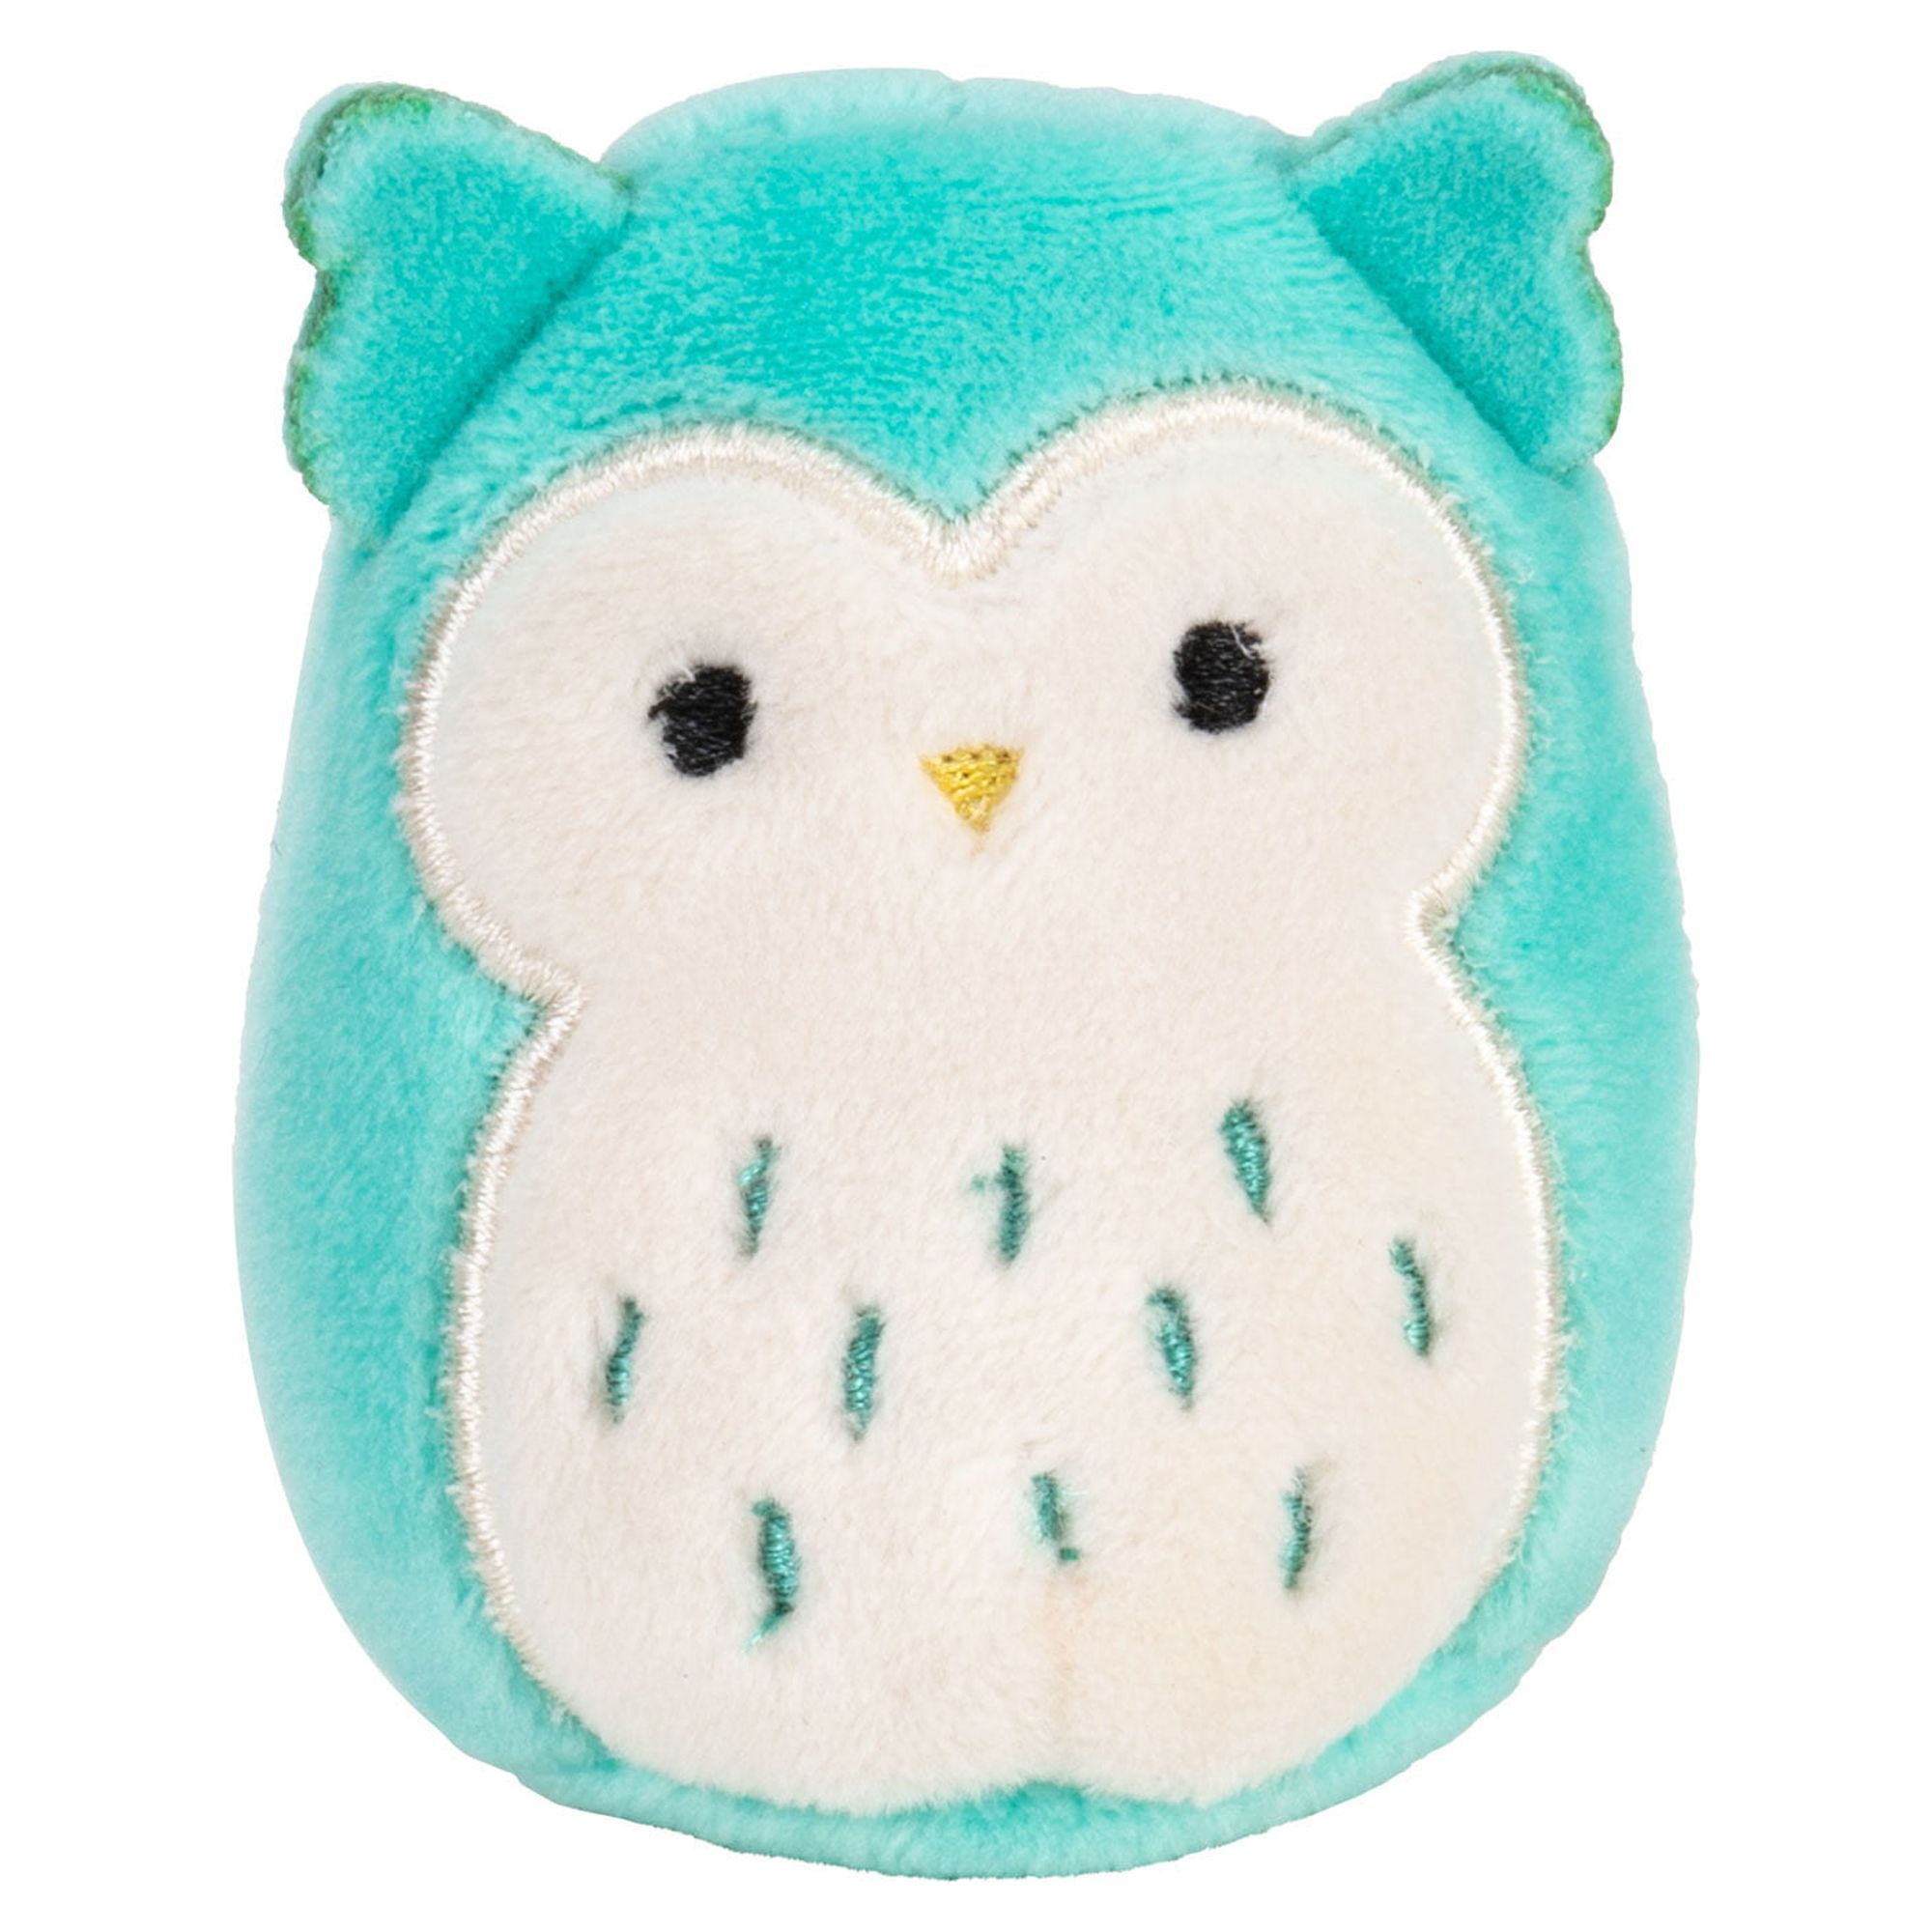 Squishville by Squishmallow Boutique Play Scene, 2” Lola Soft Mini- Squishmallow, 8” Playset, 1 Plush Accessory, Marshmallow-Soft Animals,  Boutique Toys 